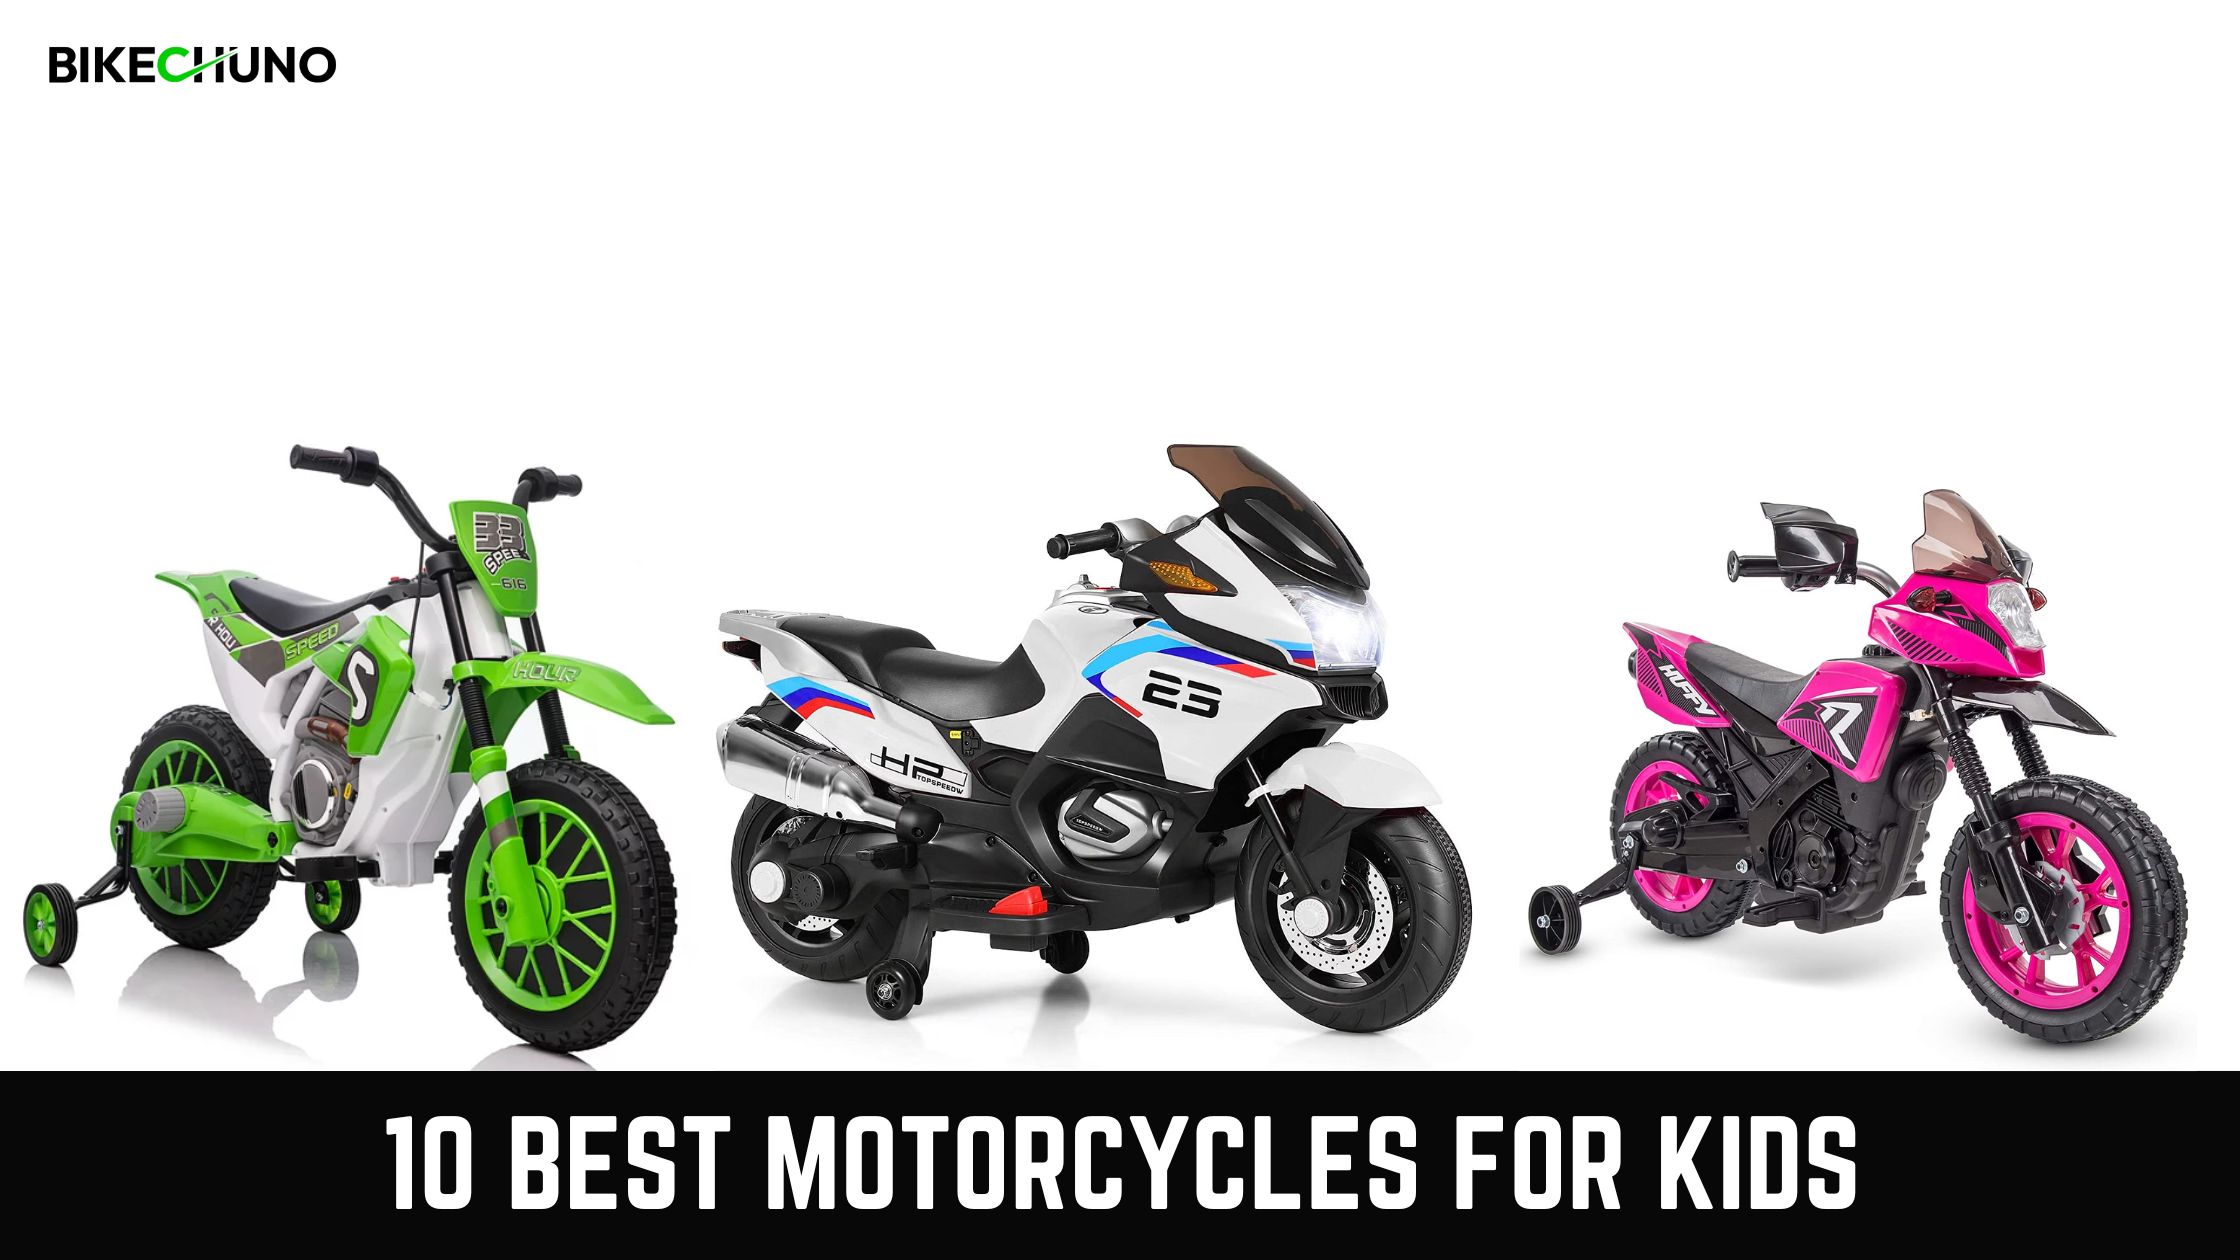 Best Motorcycles For Kids